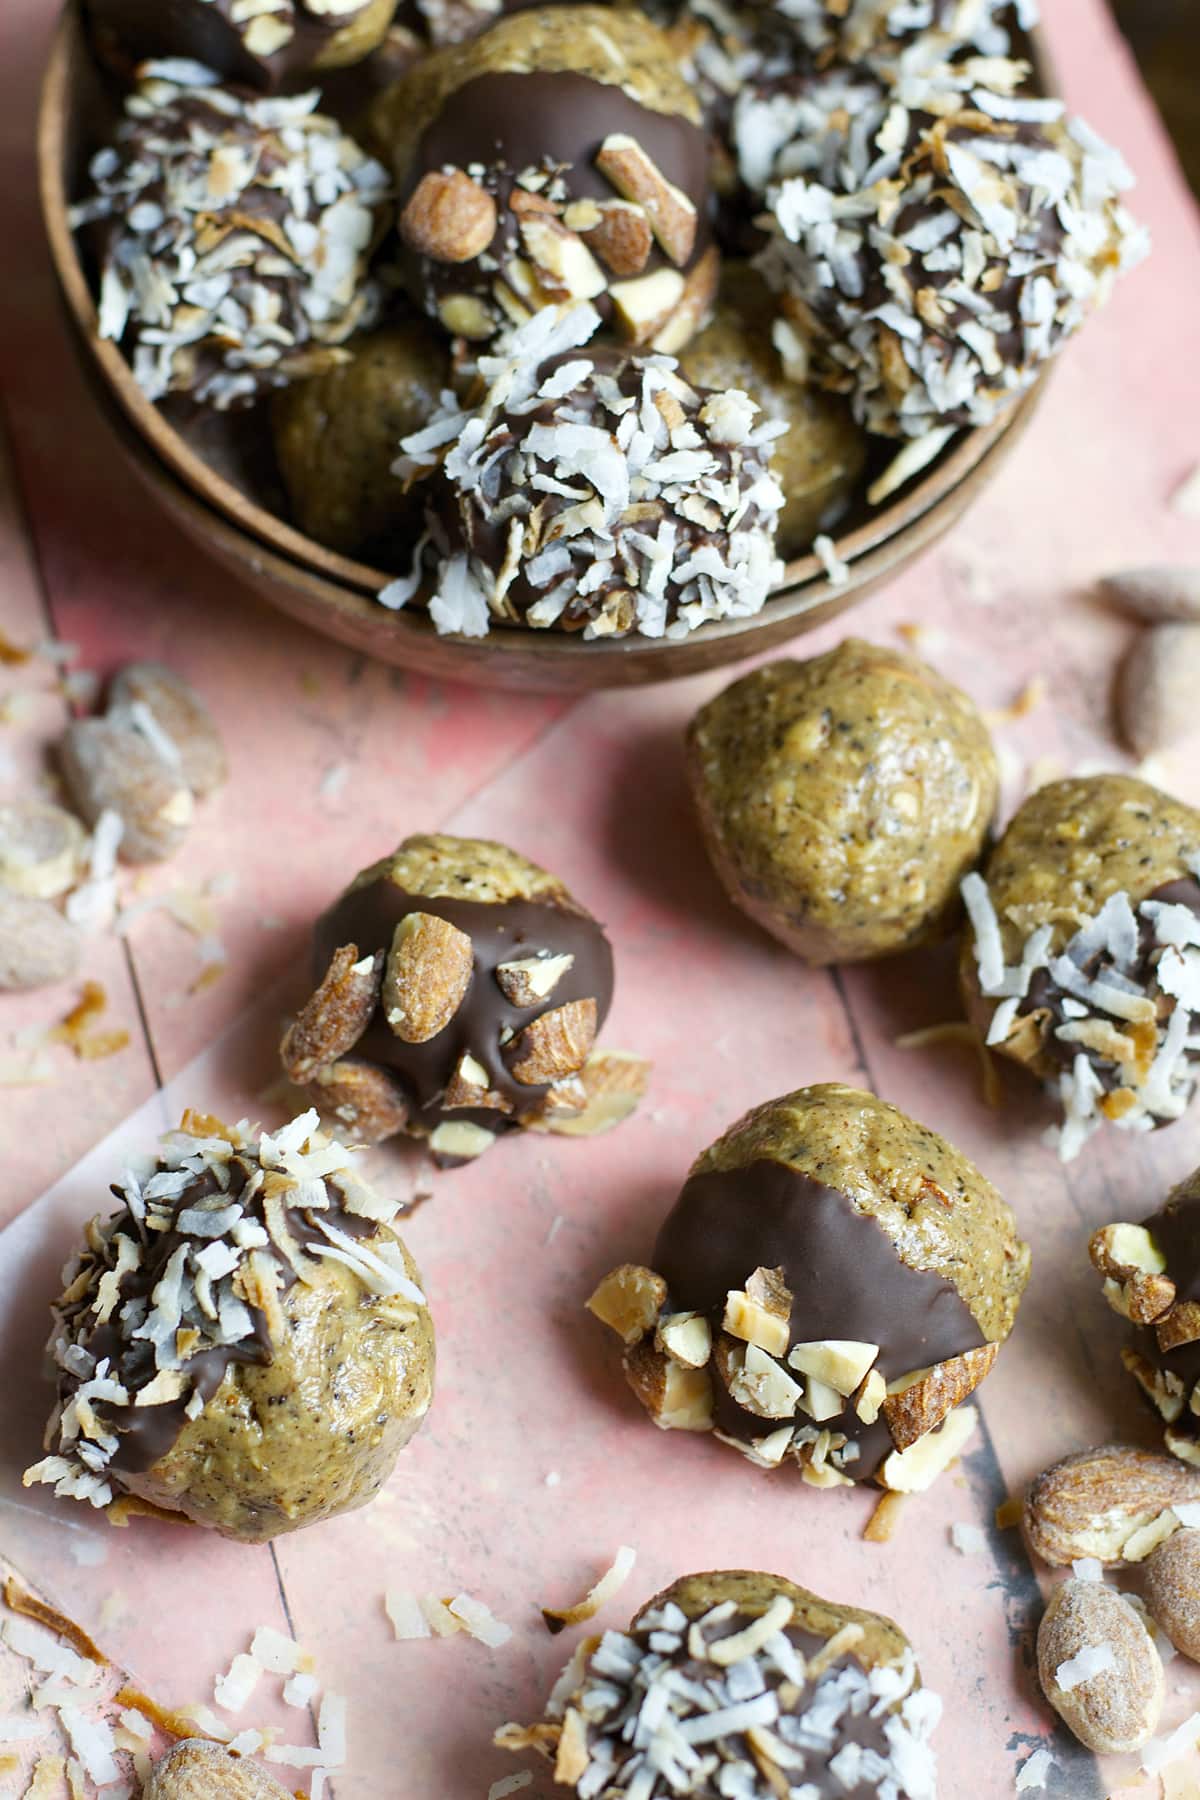 Coconut Mocha Almond Butter Espresso Balls are packed with oats, almonds, coffee and toasted coconut! The perfect snack for a little pick me up!